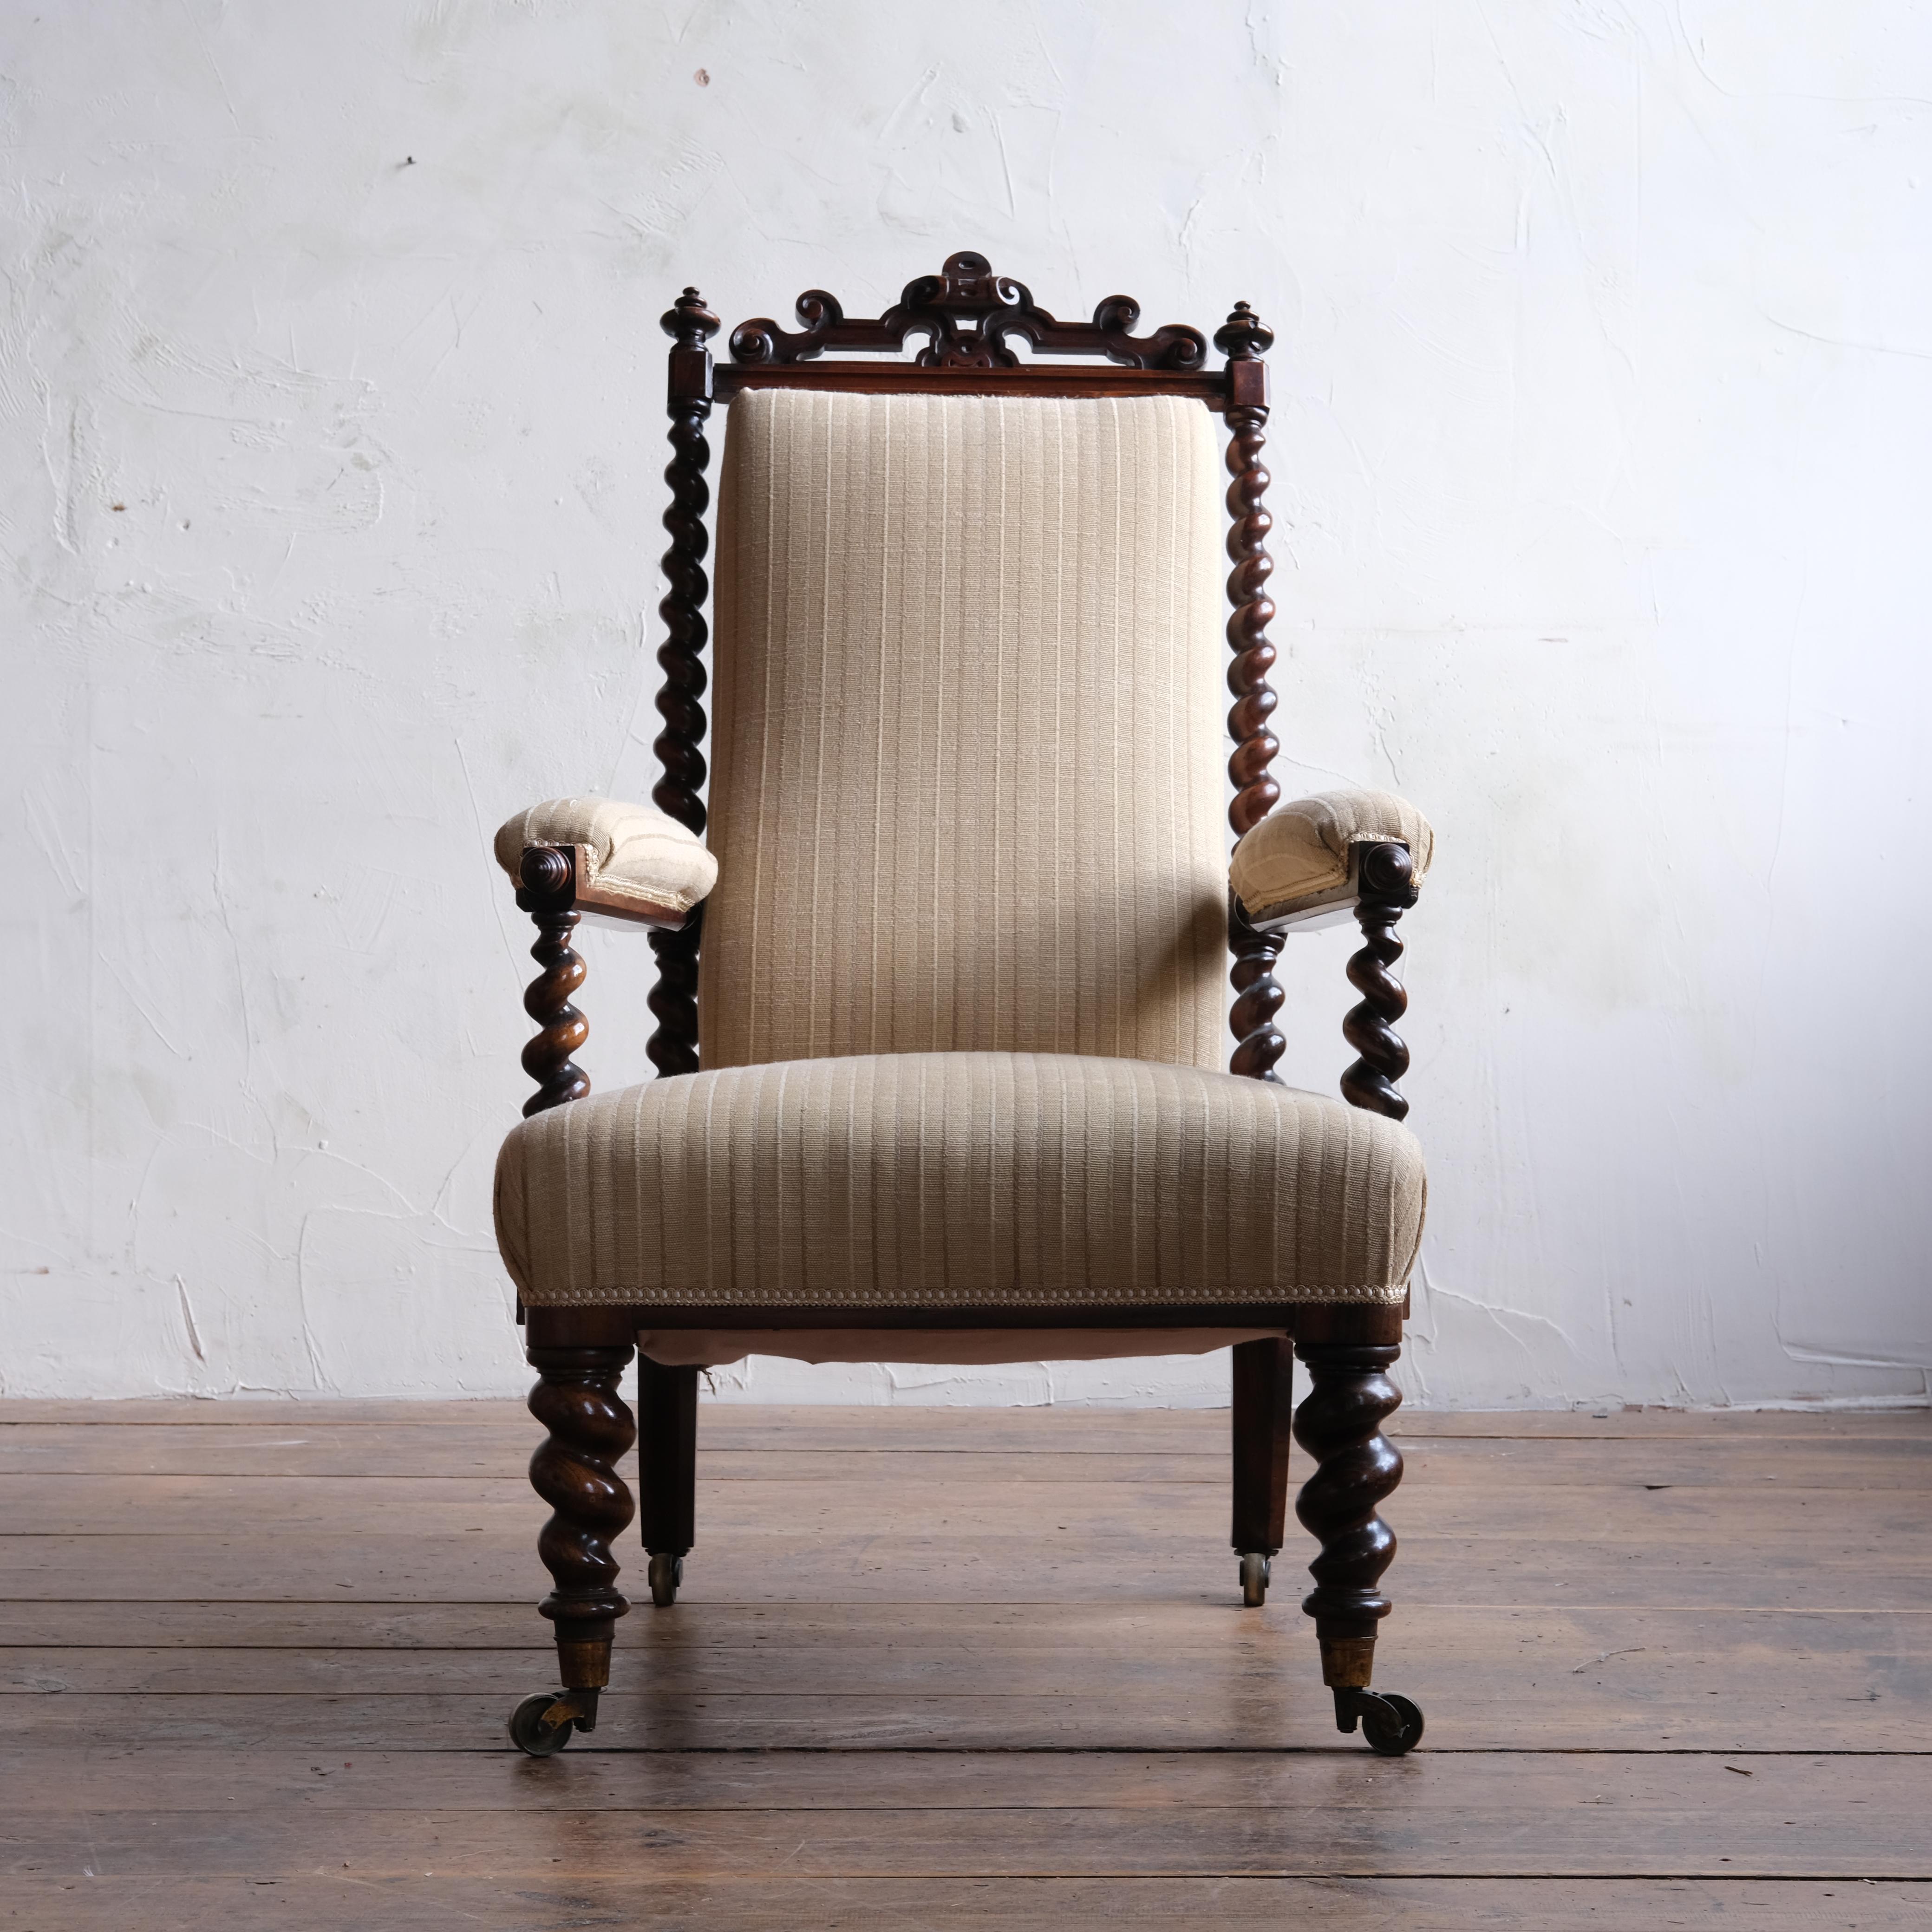 Victorian Miles and Edwards Rosewood Open Armchair, circa 1840